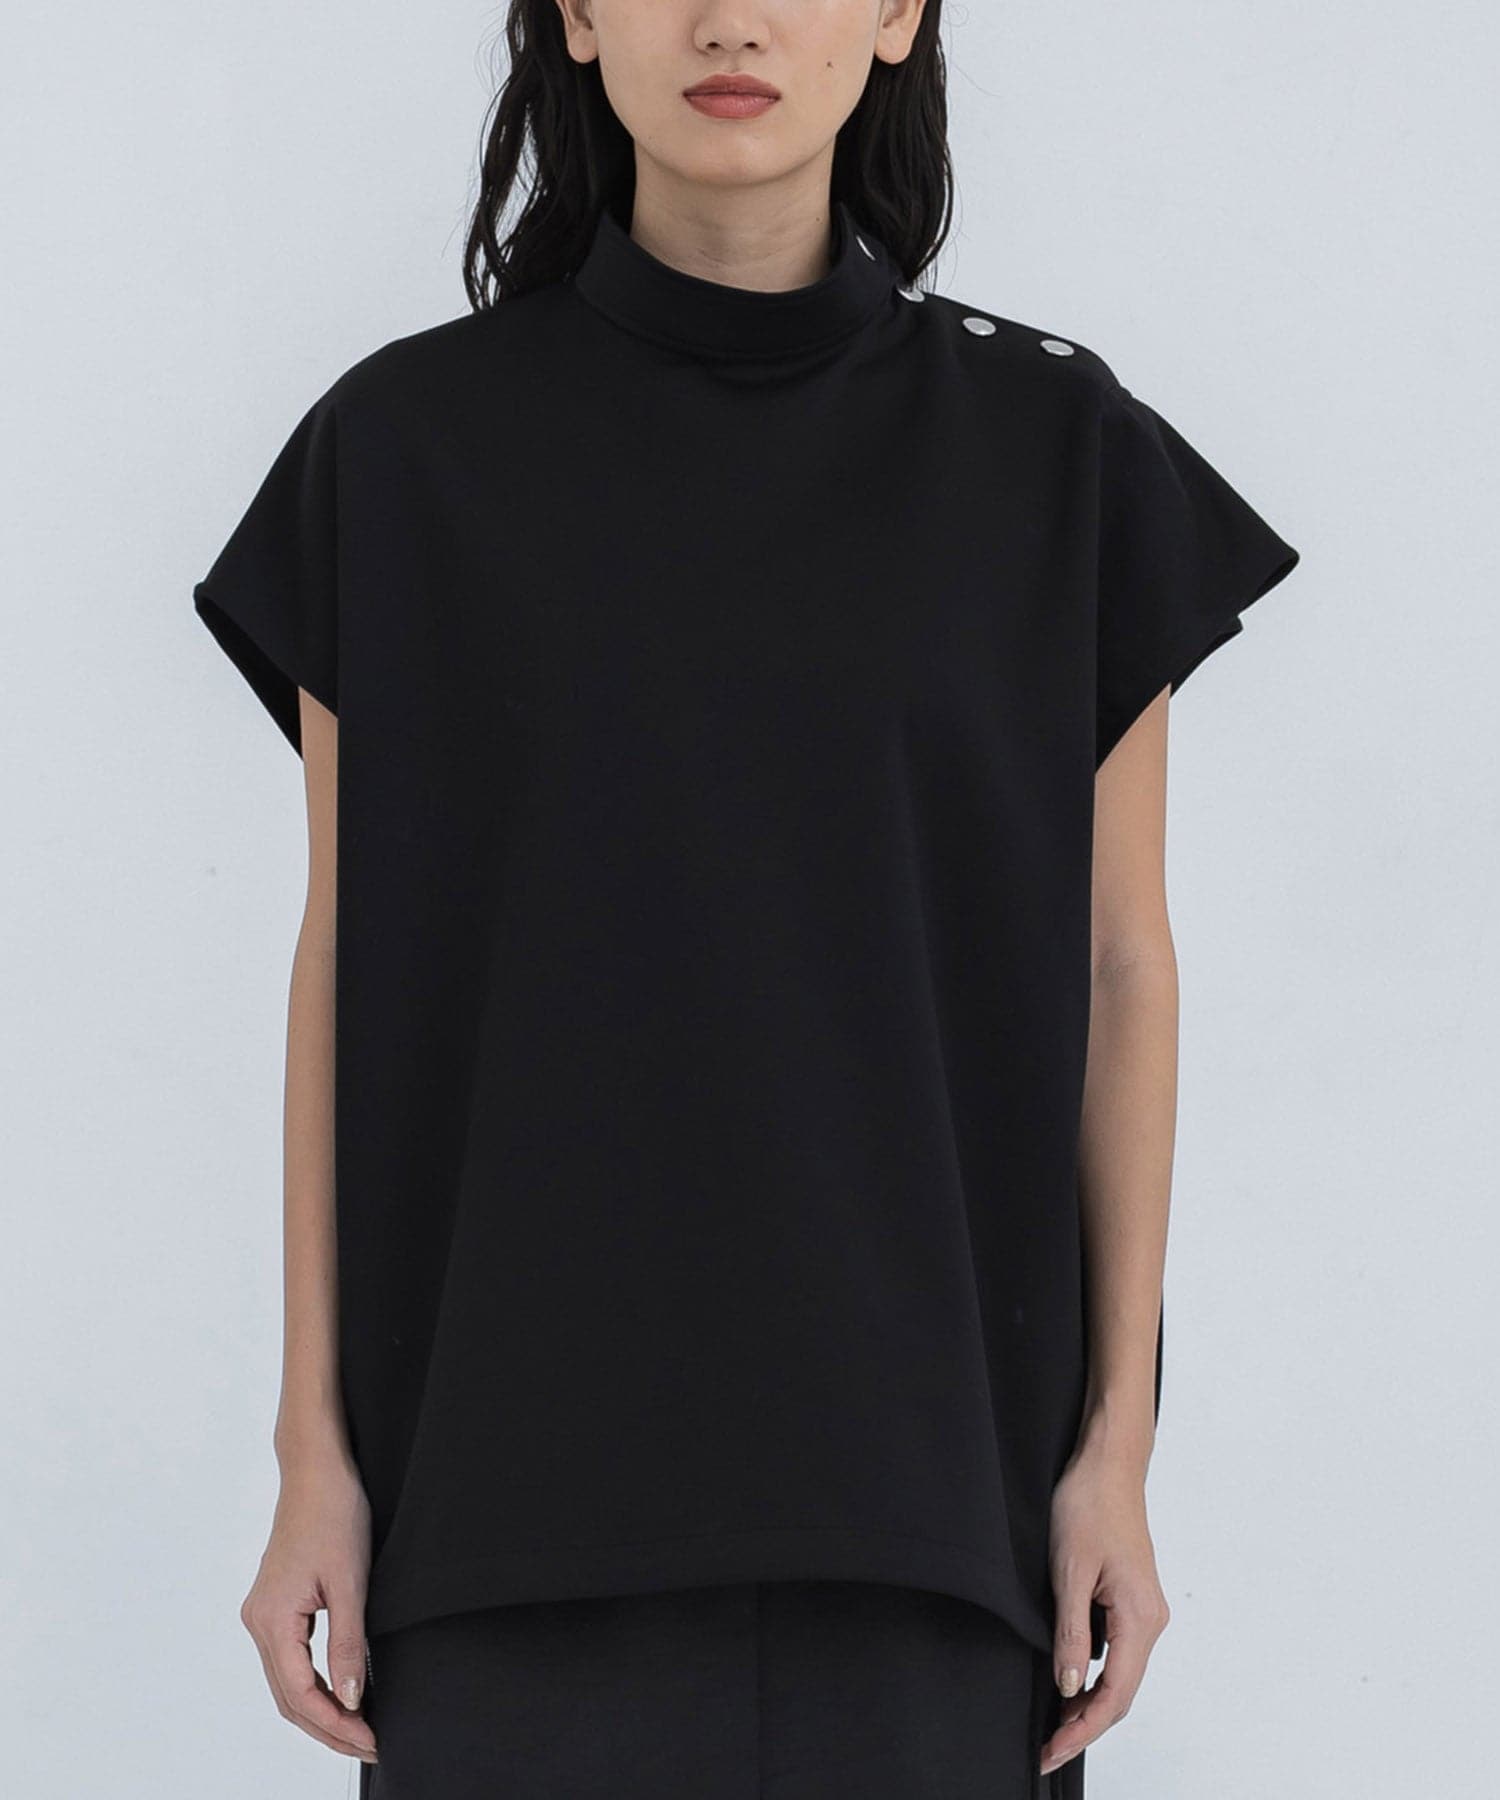 RERACS SIDE OPEN SLEEVELESS PULLOVER THE RERACS